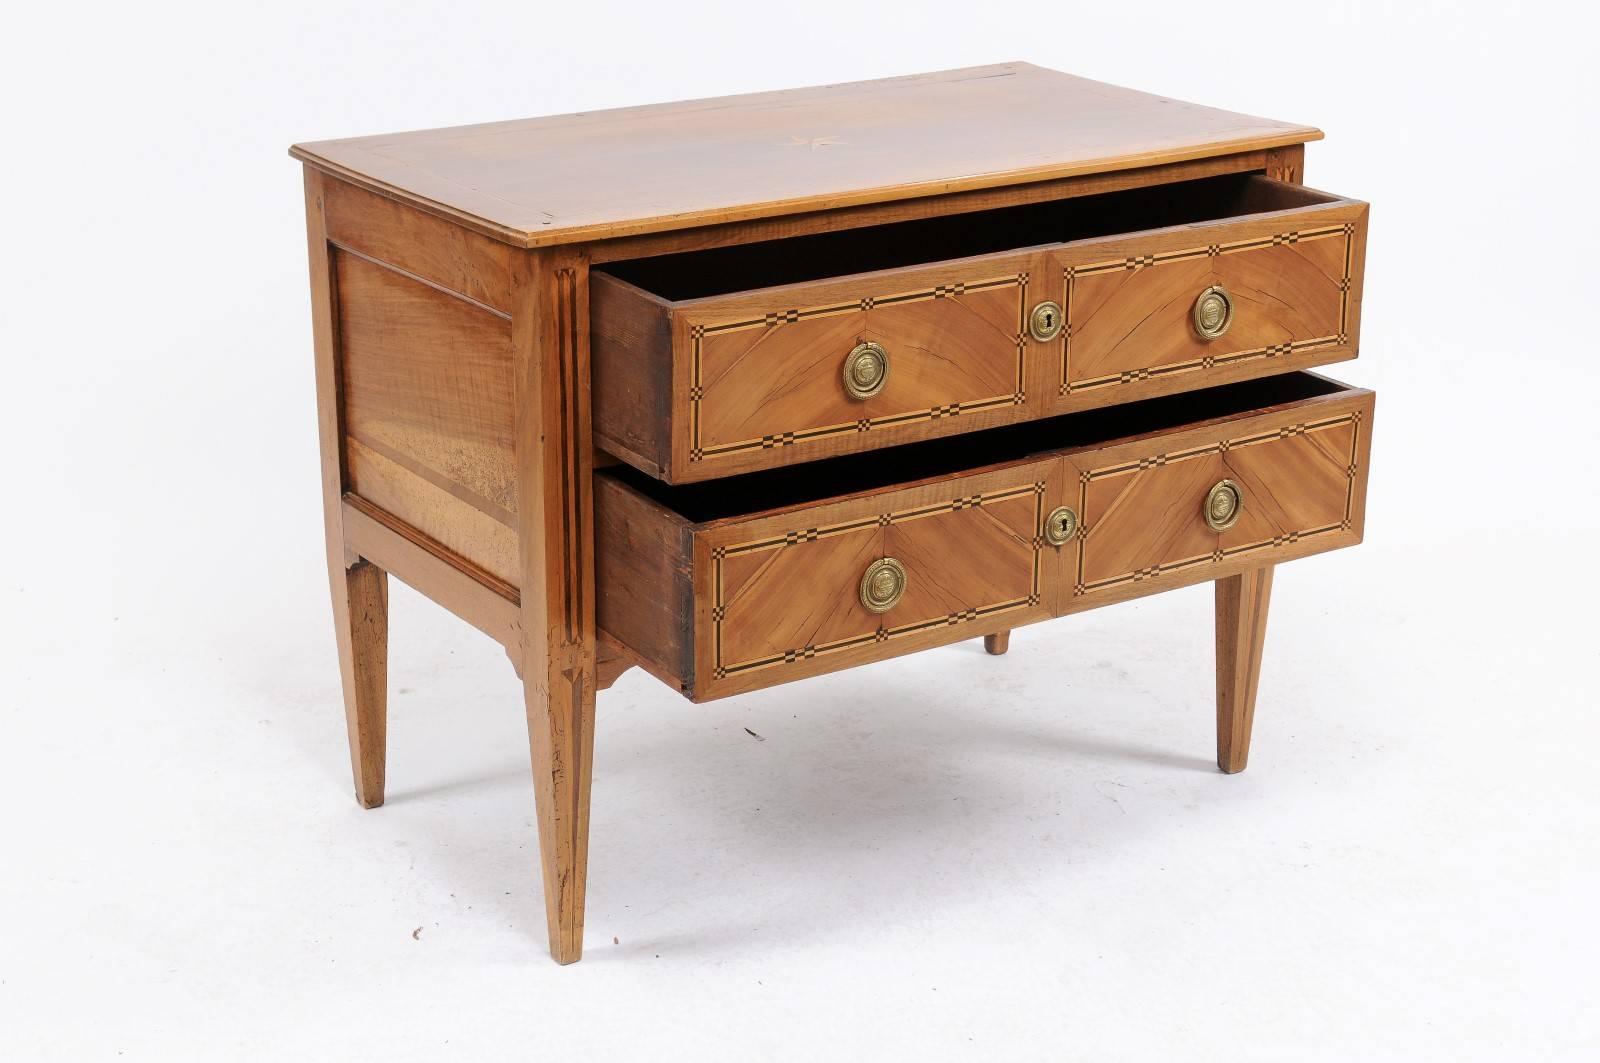 Louis XVI Period French Walnut Commode with Marquetry Décor, Late 18th Century 4